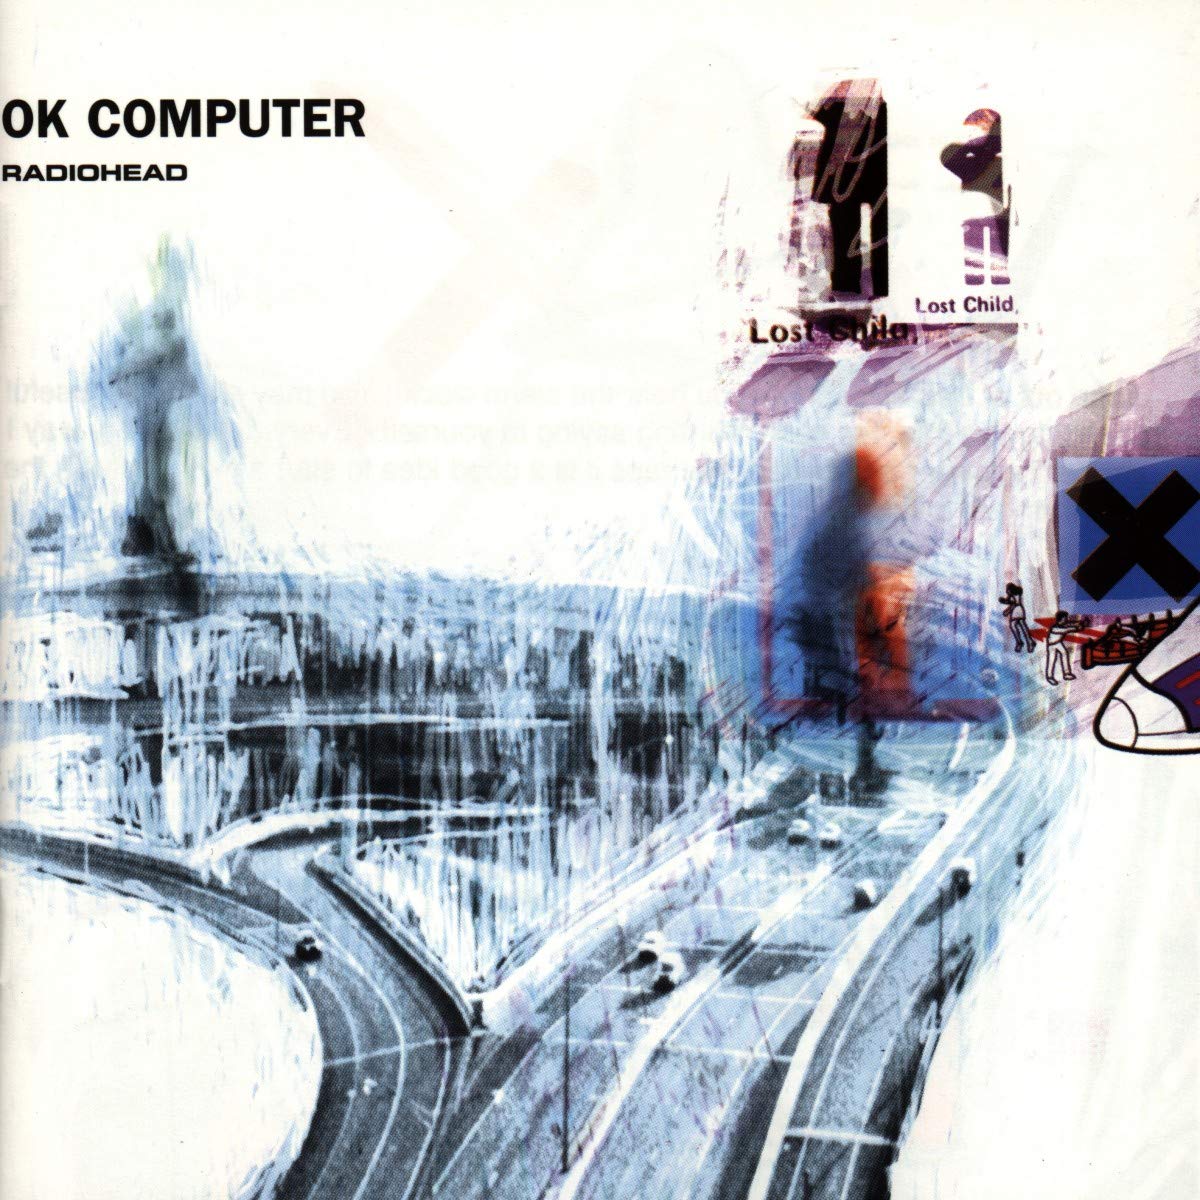 OK Computer - radiohead- Exit Music (For a Film)- Electioneering- Luckyi've used this album to put myself to sleep since i was like 14